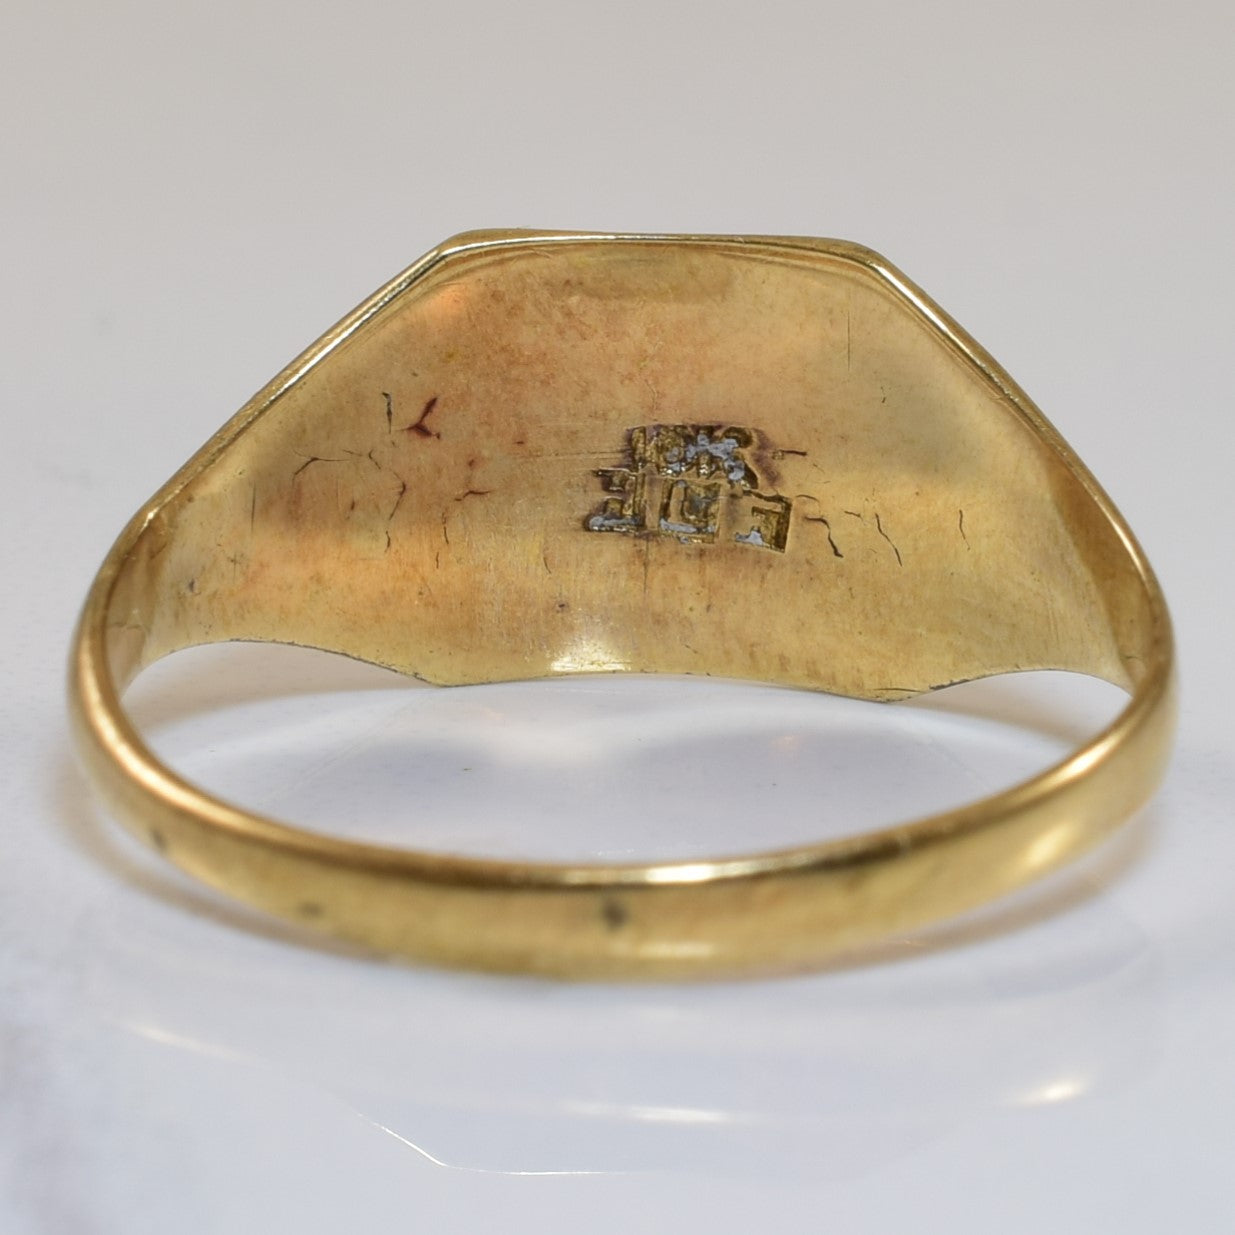 Early 1900s 'AFC' Engraved Signet Ring | SZ 7 |